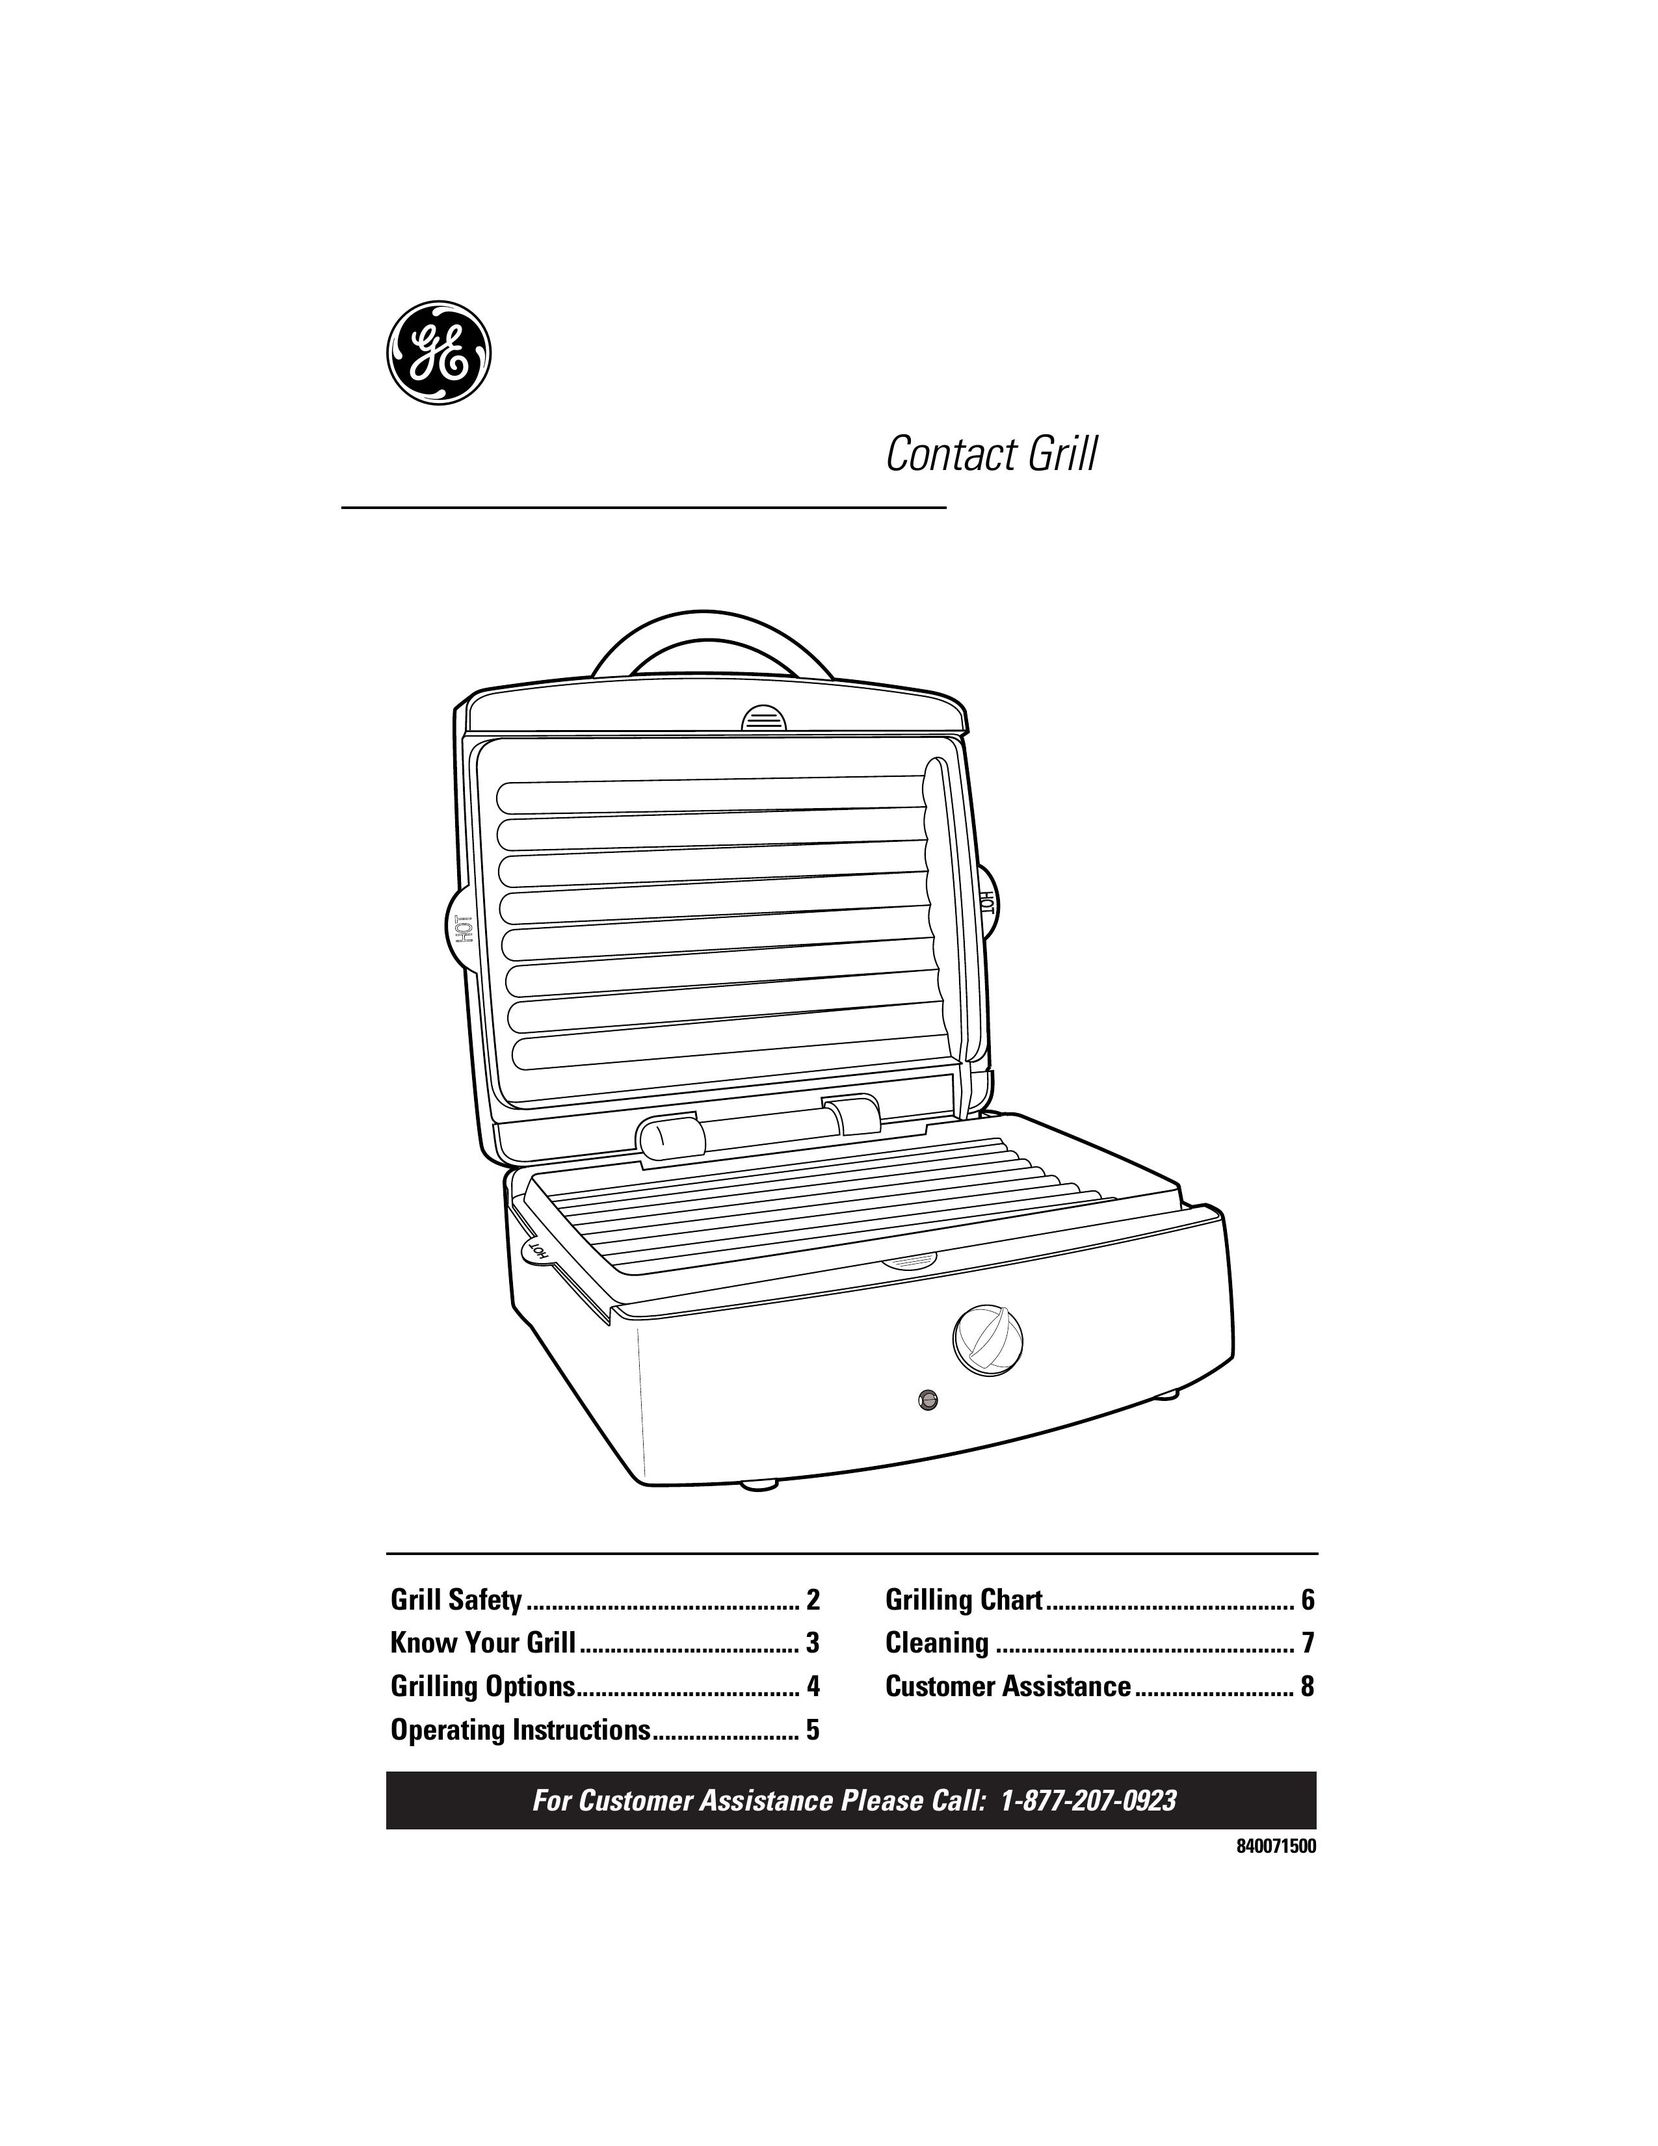 GE 106621 Kitchen Grill User Manual